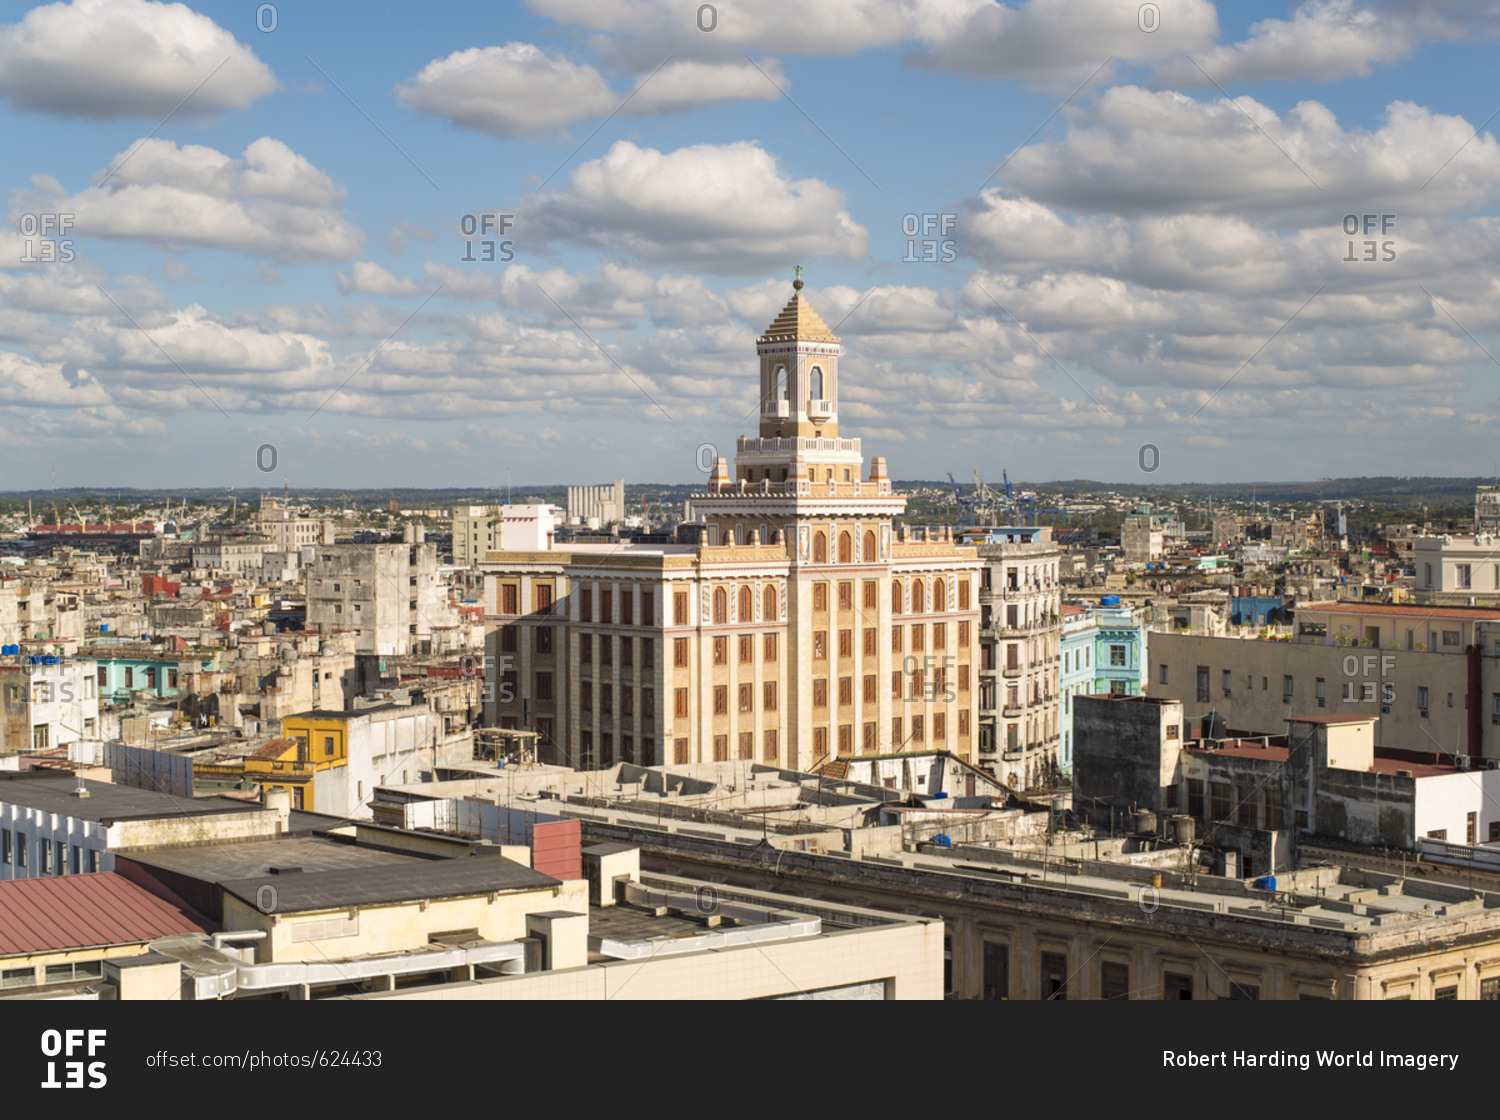 Architecture from an elevated view near the Malecon, Havana, Cuba, West Indies, Central America